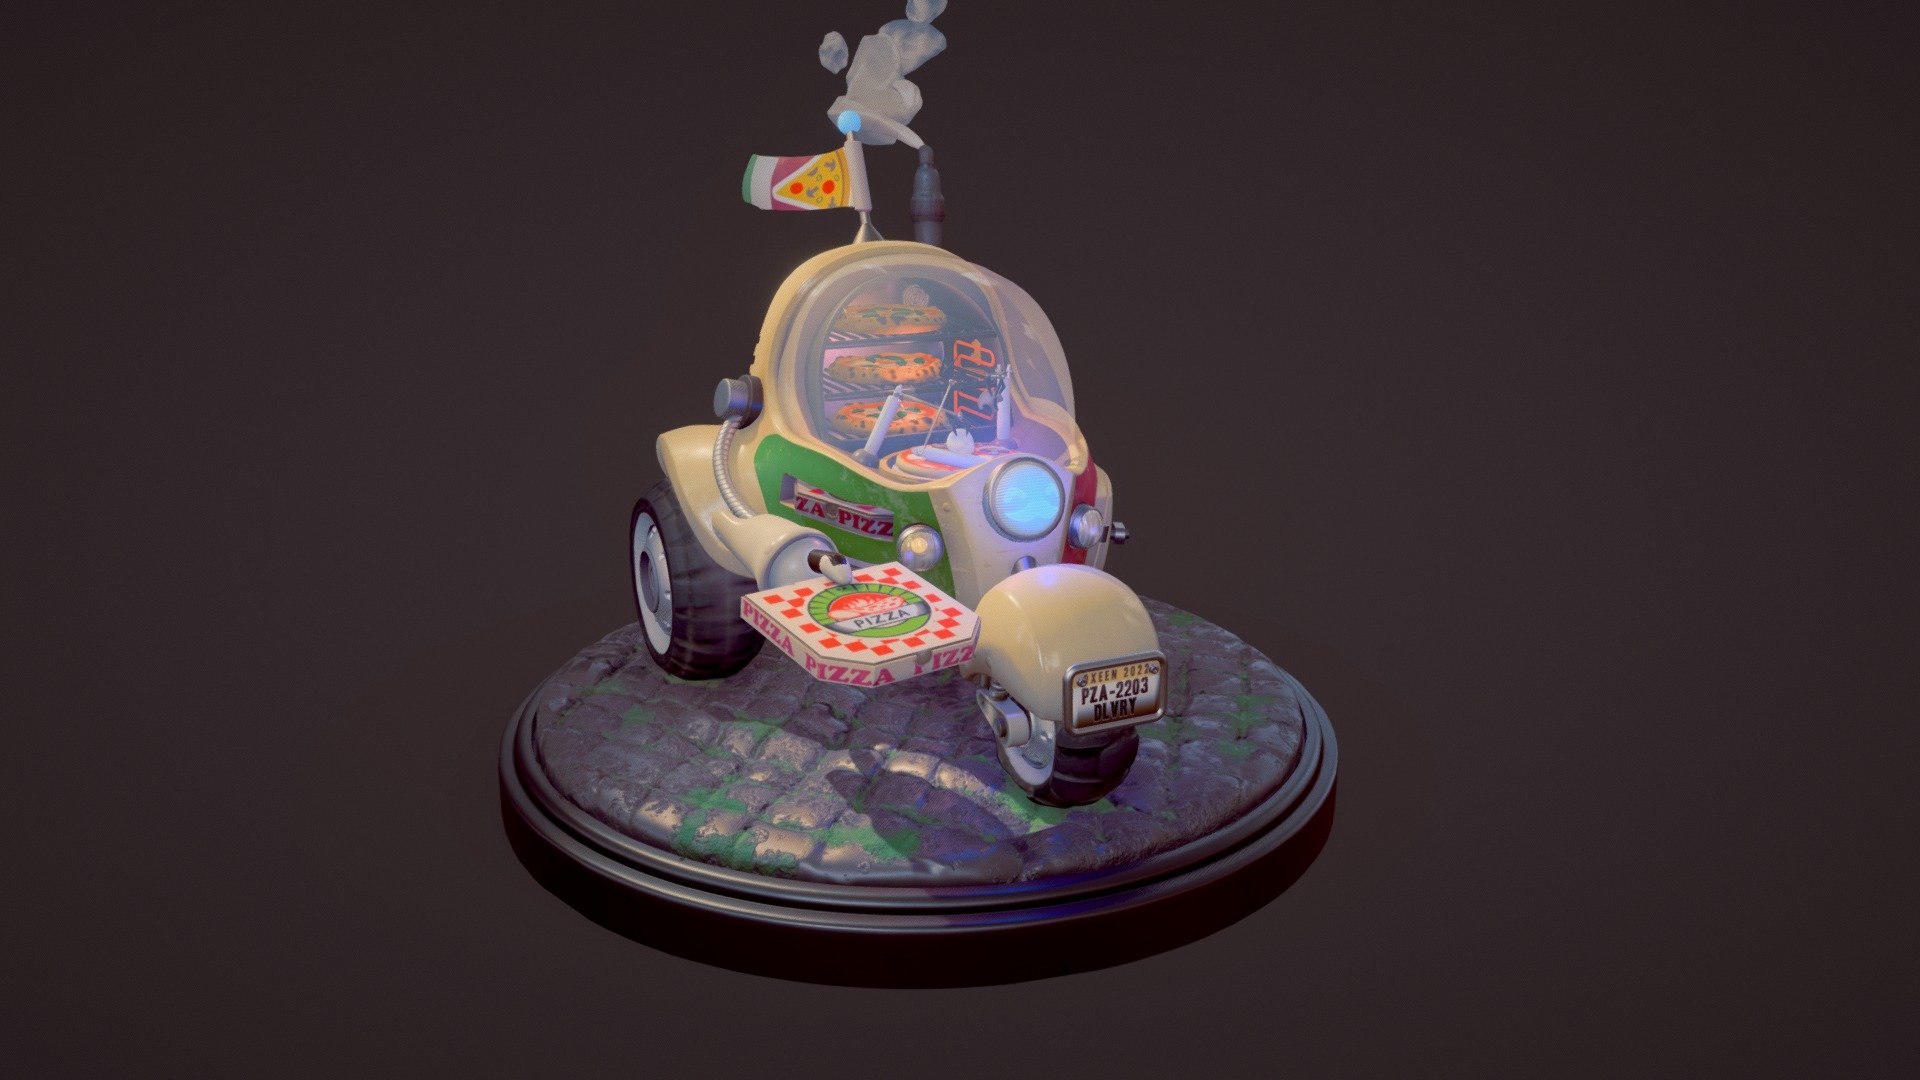 Had a lot of fun making this pizza-making-and-delivery robot! Sculpted on Zbrush, retopology and UV on 3DS Max, textured in Substance Painter.
76K vertices 3d model